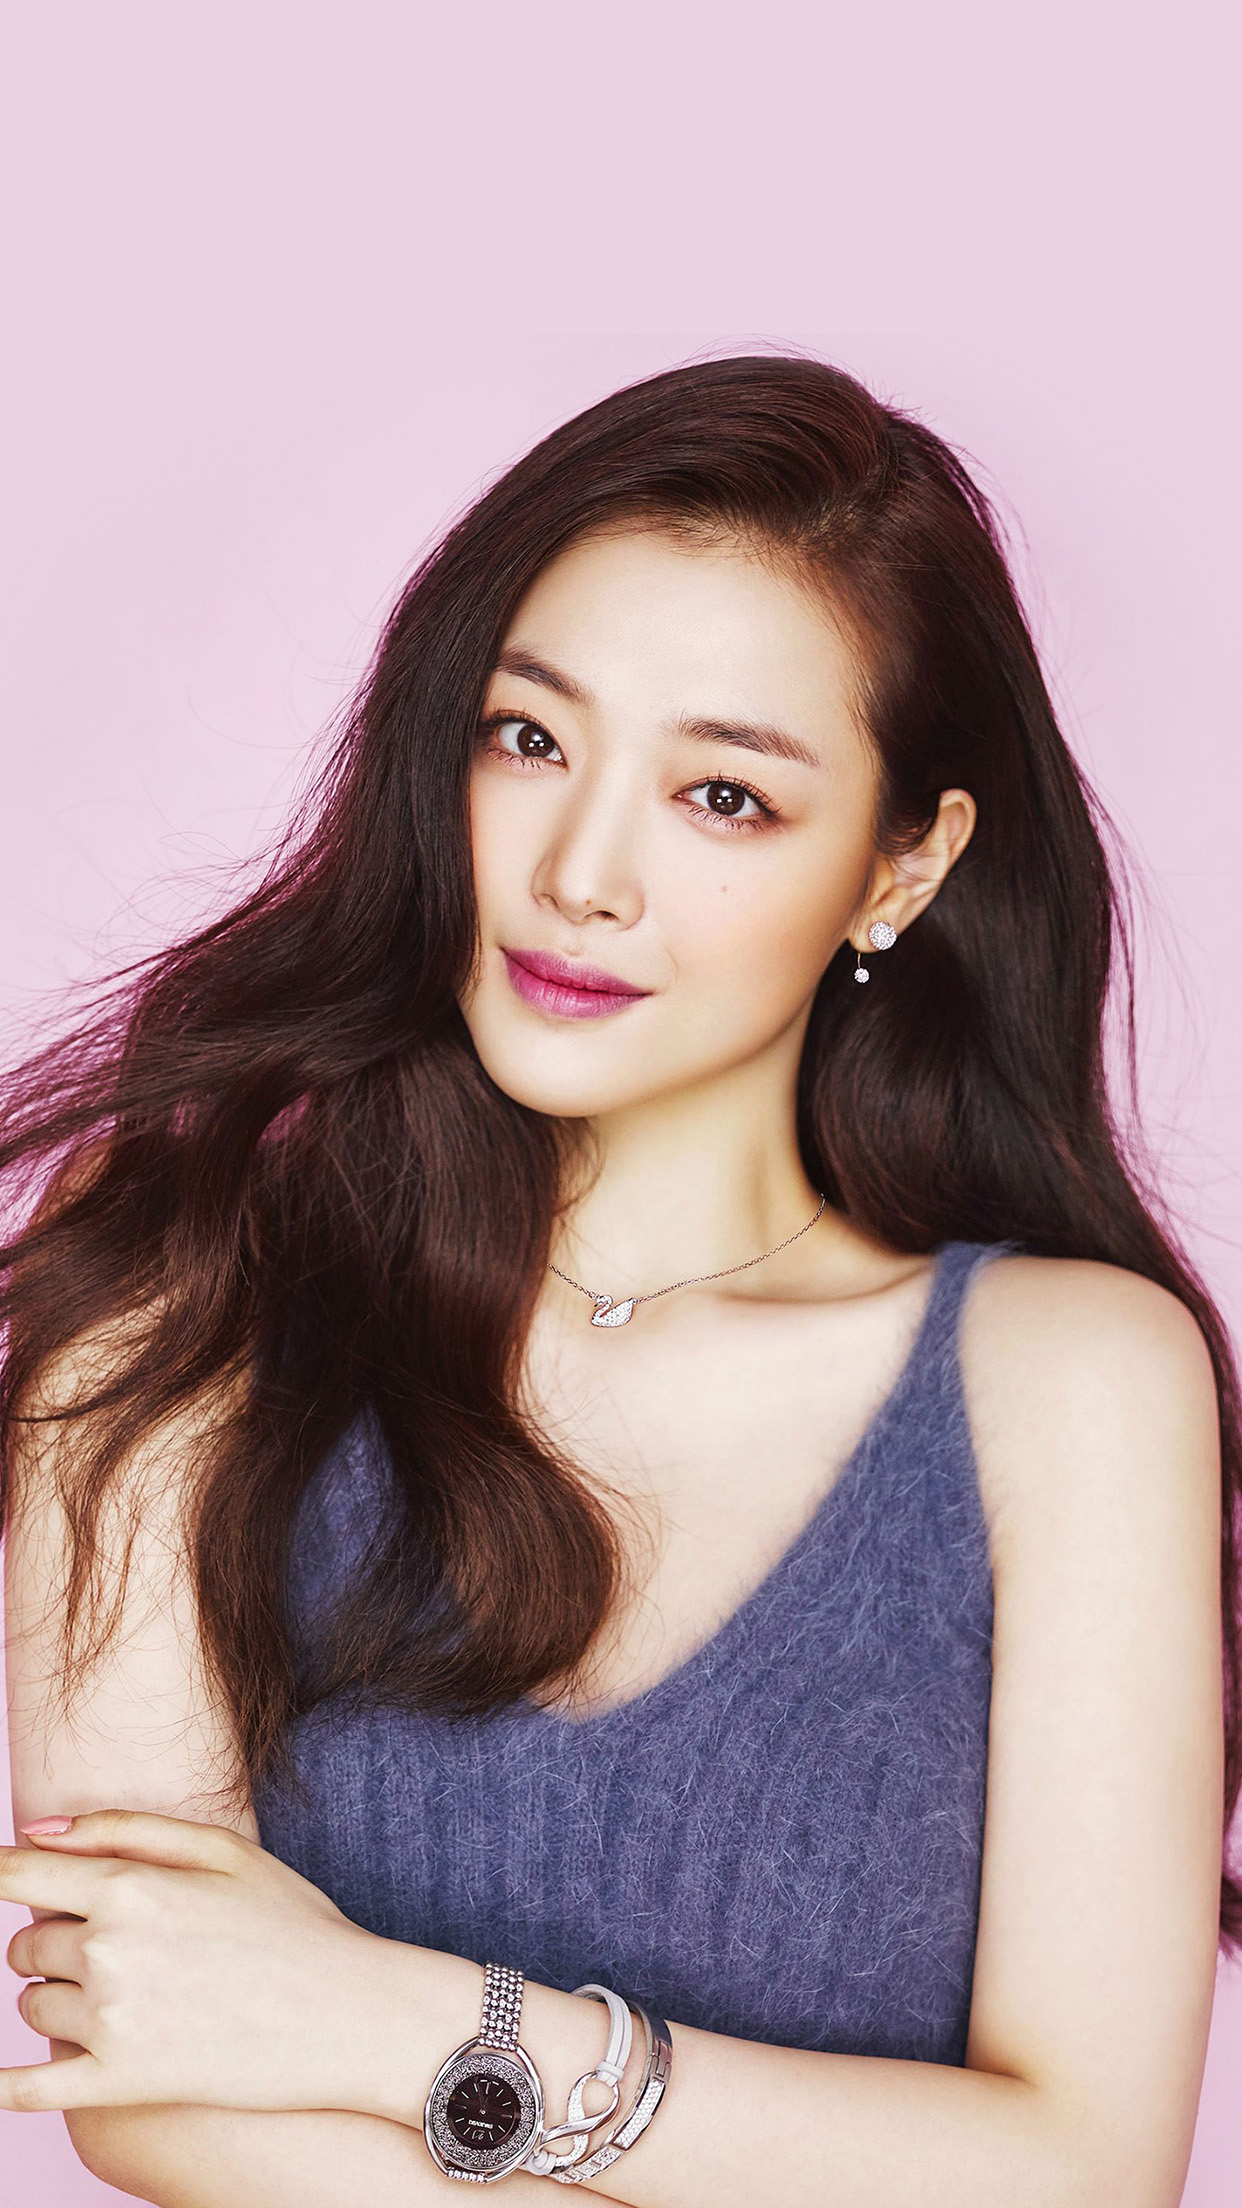 Sulli Kpop Pink Cute Girl Asian Android wallpaper